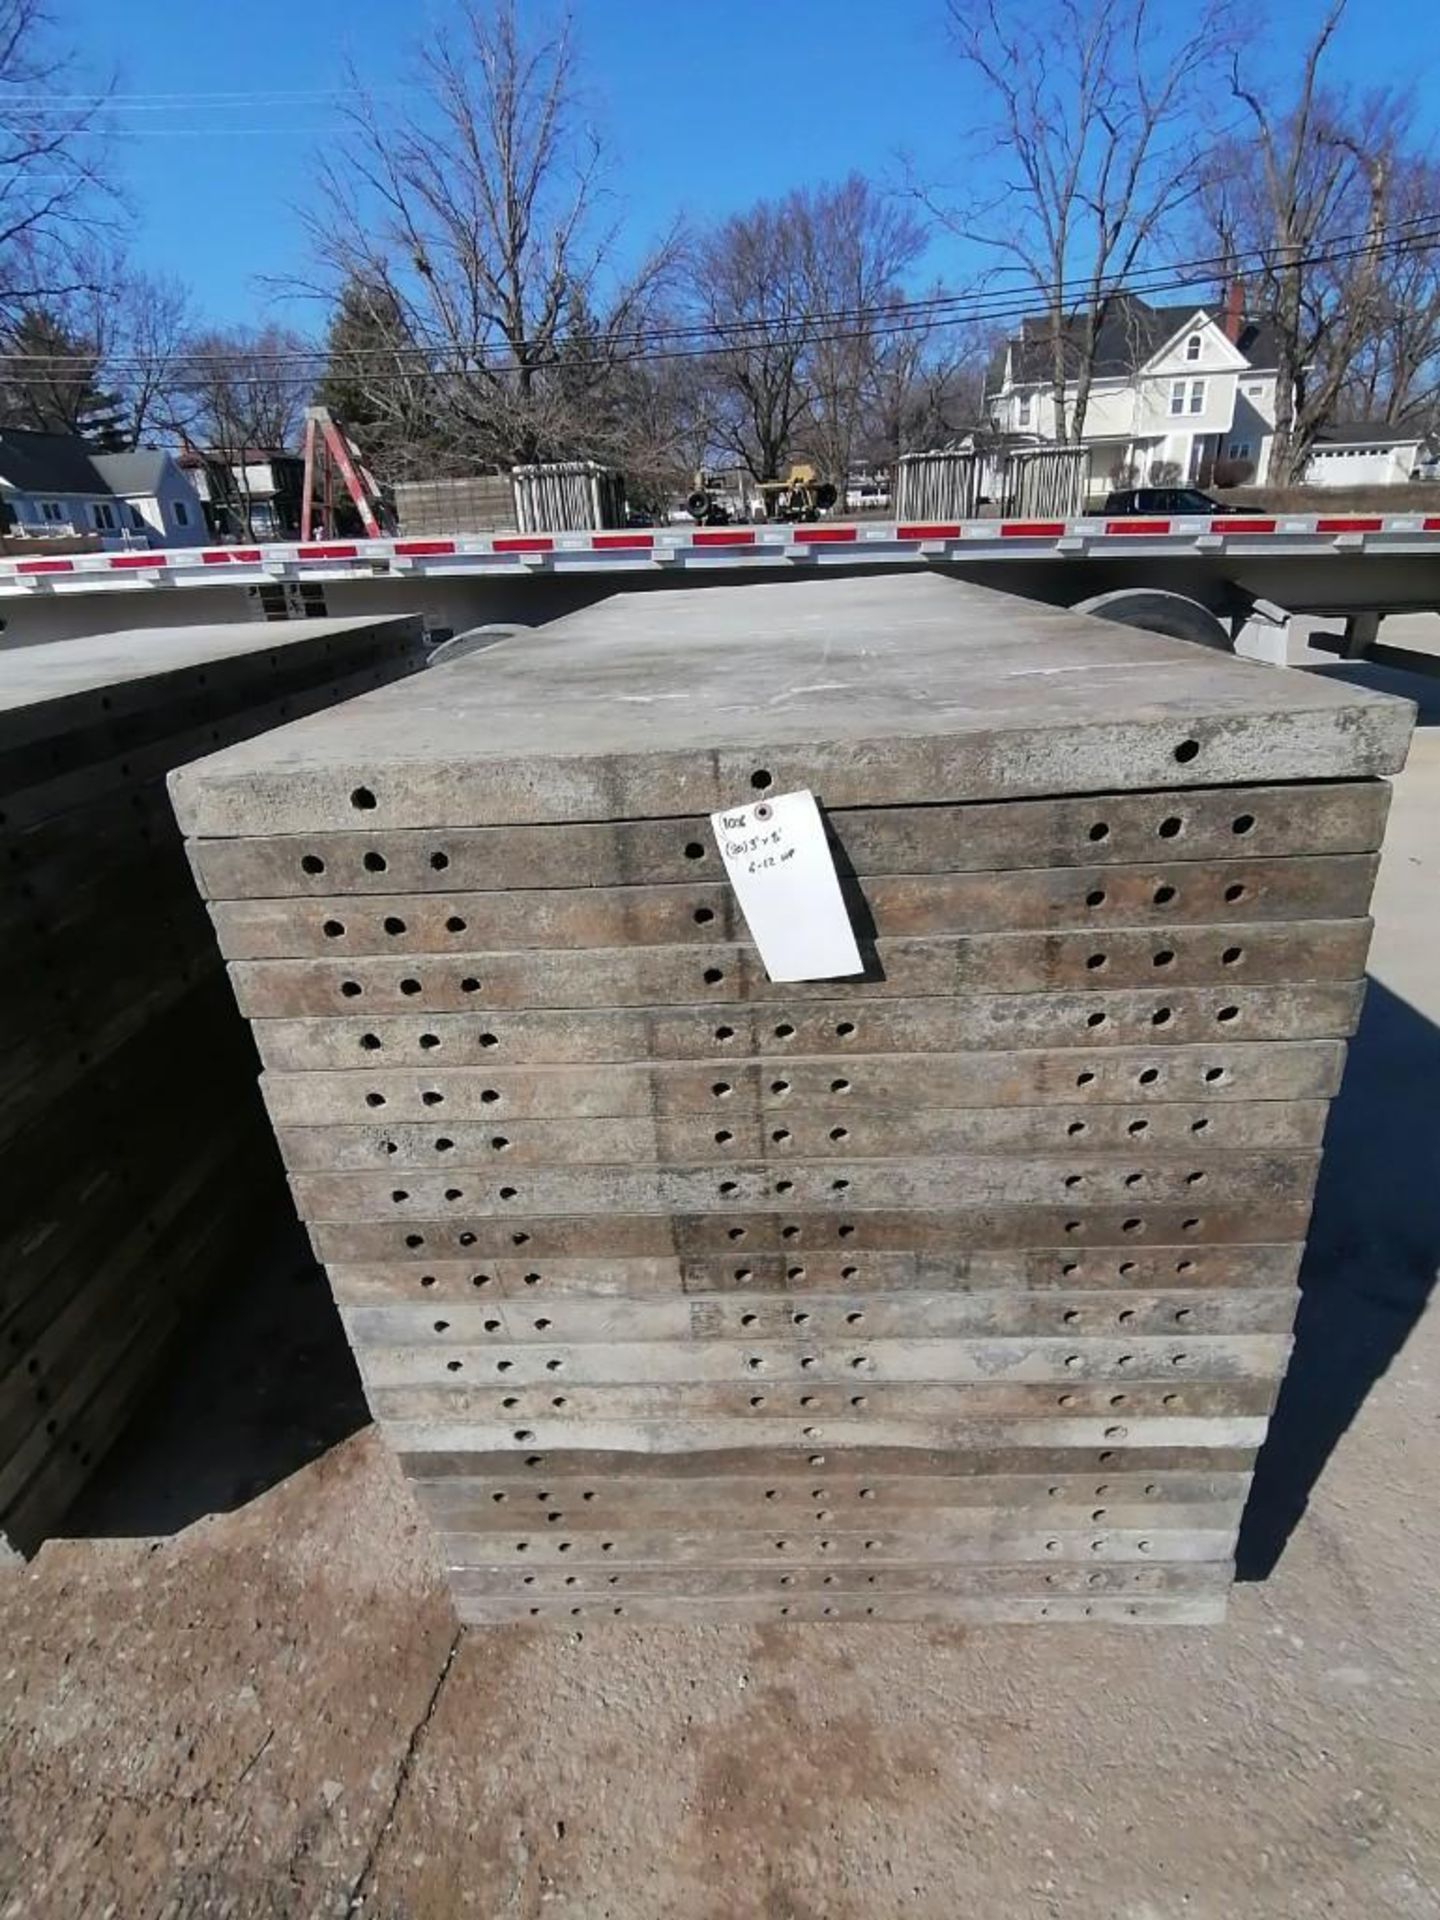 (20) 3' x 8' Wall-Ties Smooth Aluminum Concrete Forms 6-12 Hole Pattern. Located in Mt. Pleasant, - Image 6 of 10